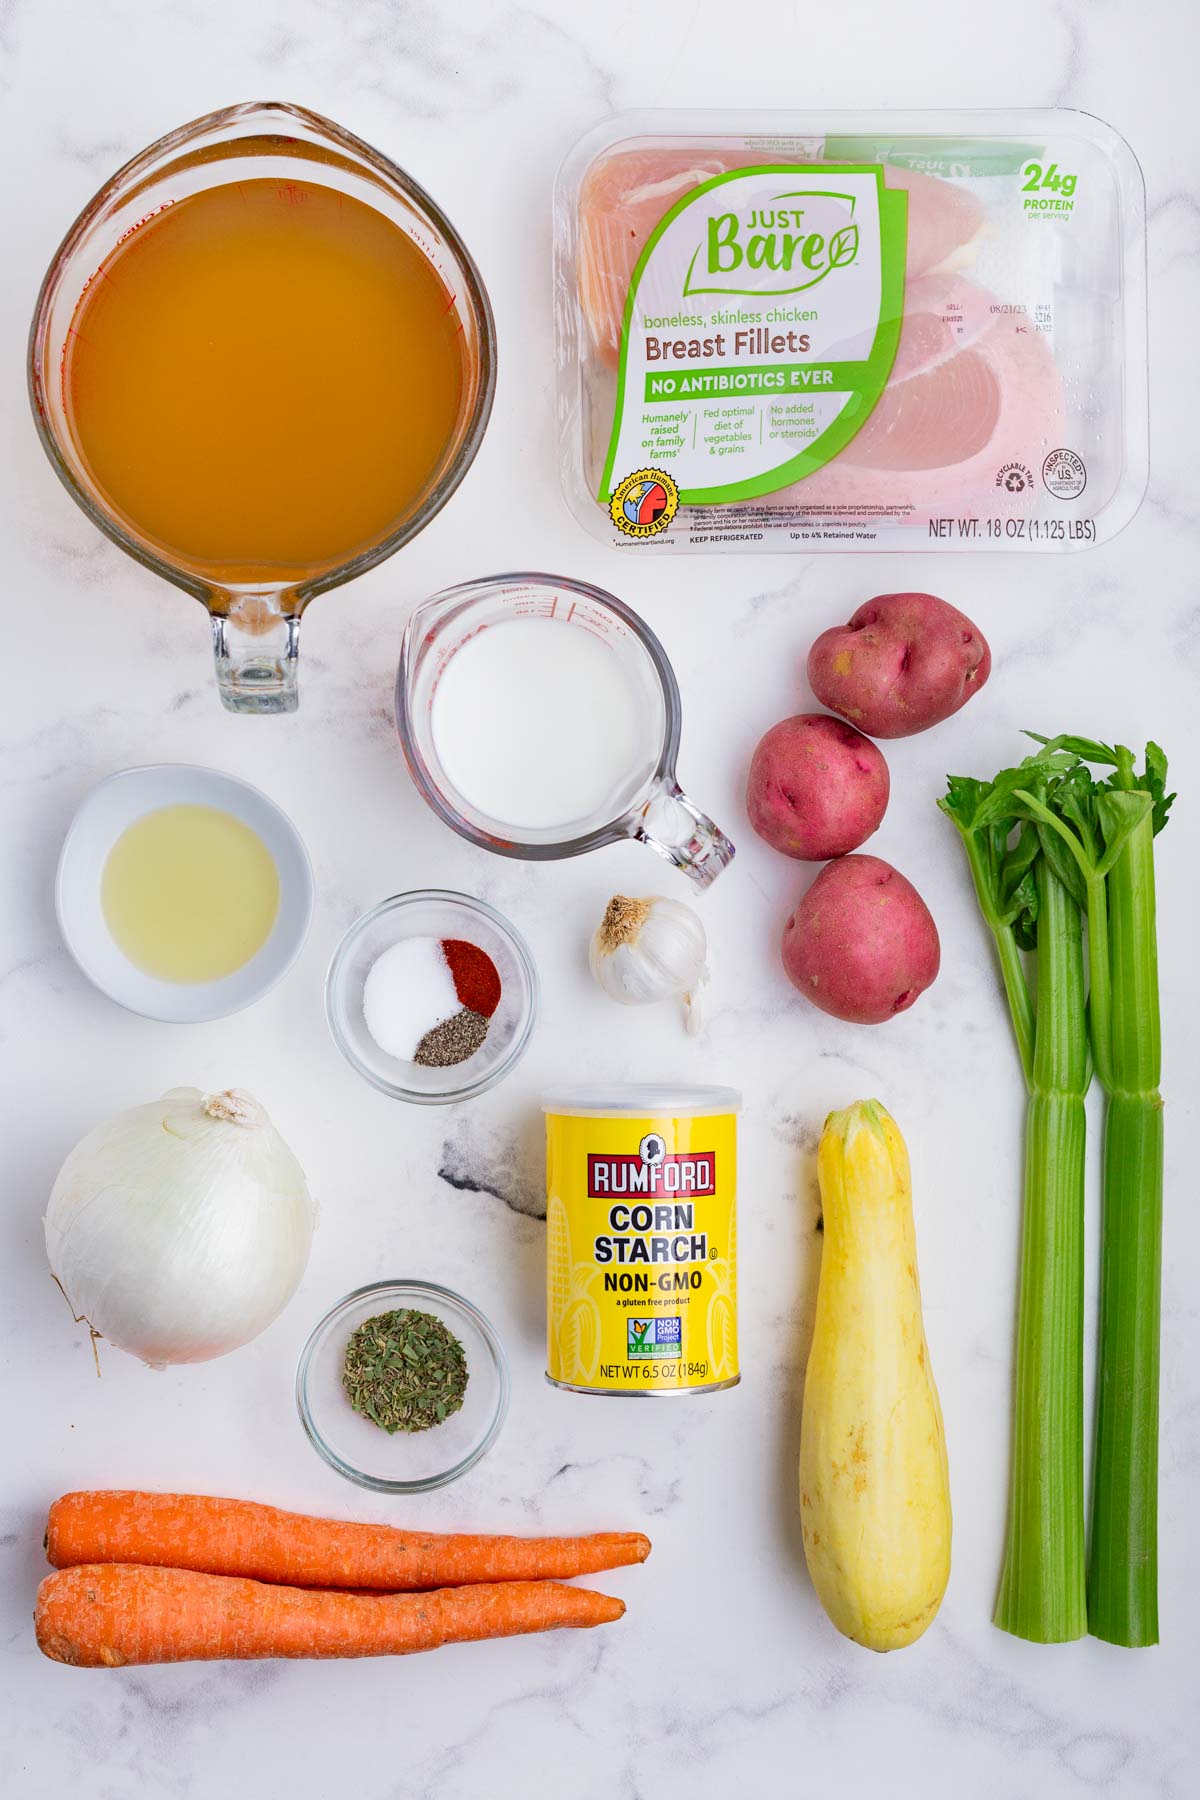 Chicken, veggies, broth, herbs, garlic, milk, and cornstarch are the ingredients for this recipe.